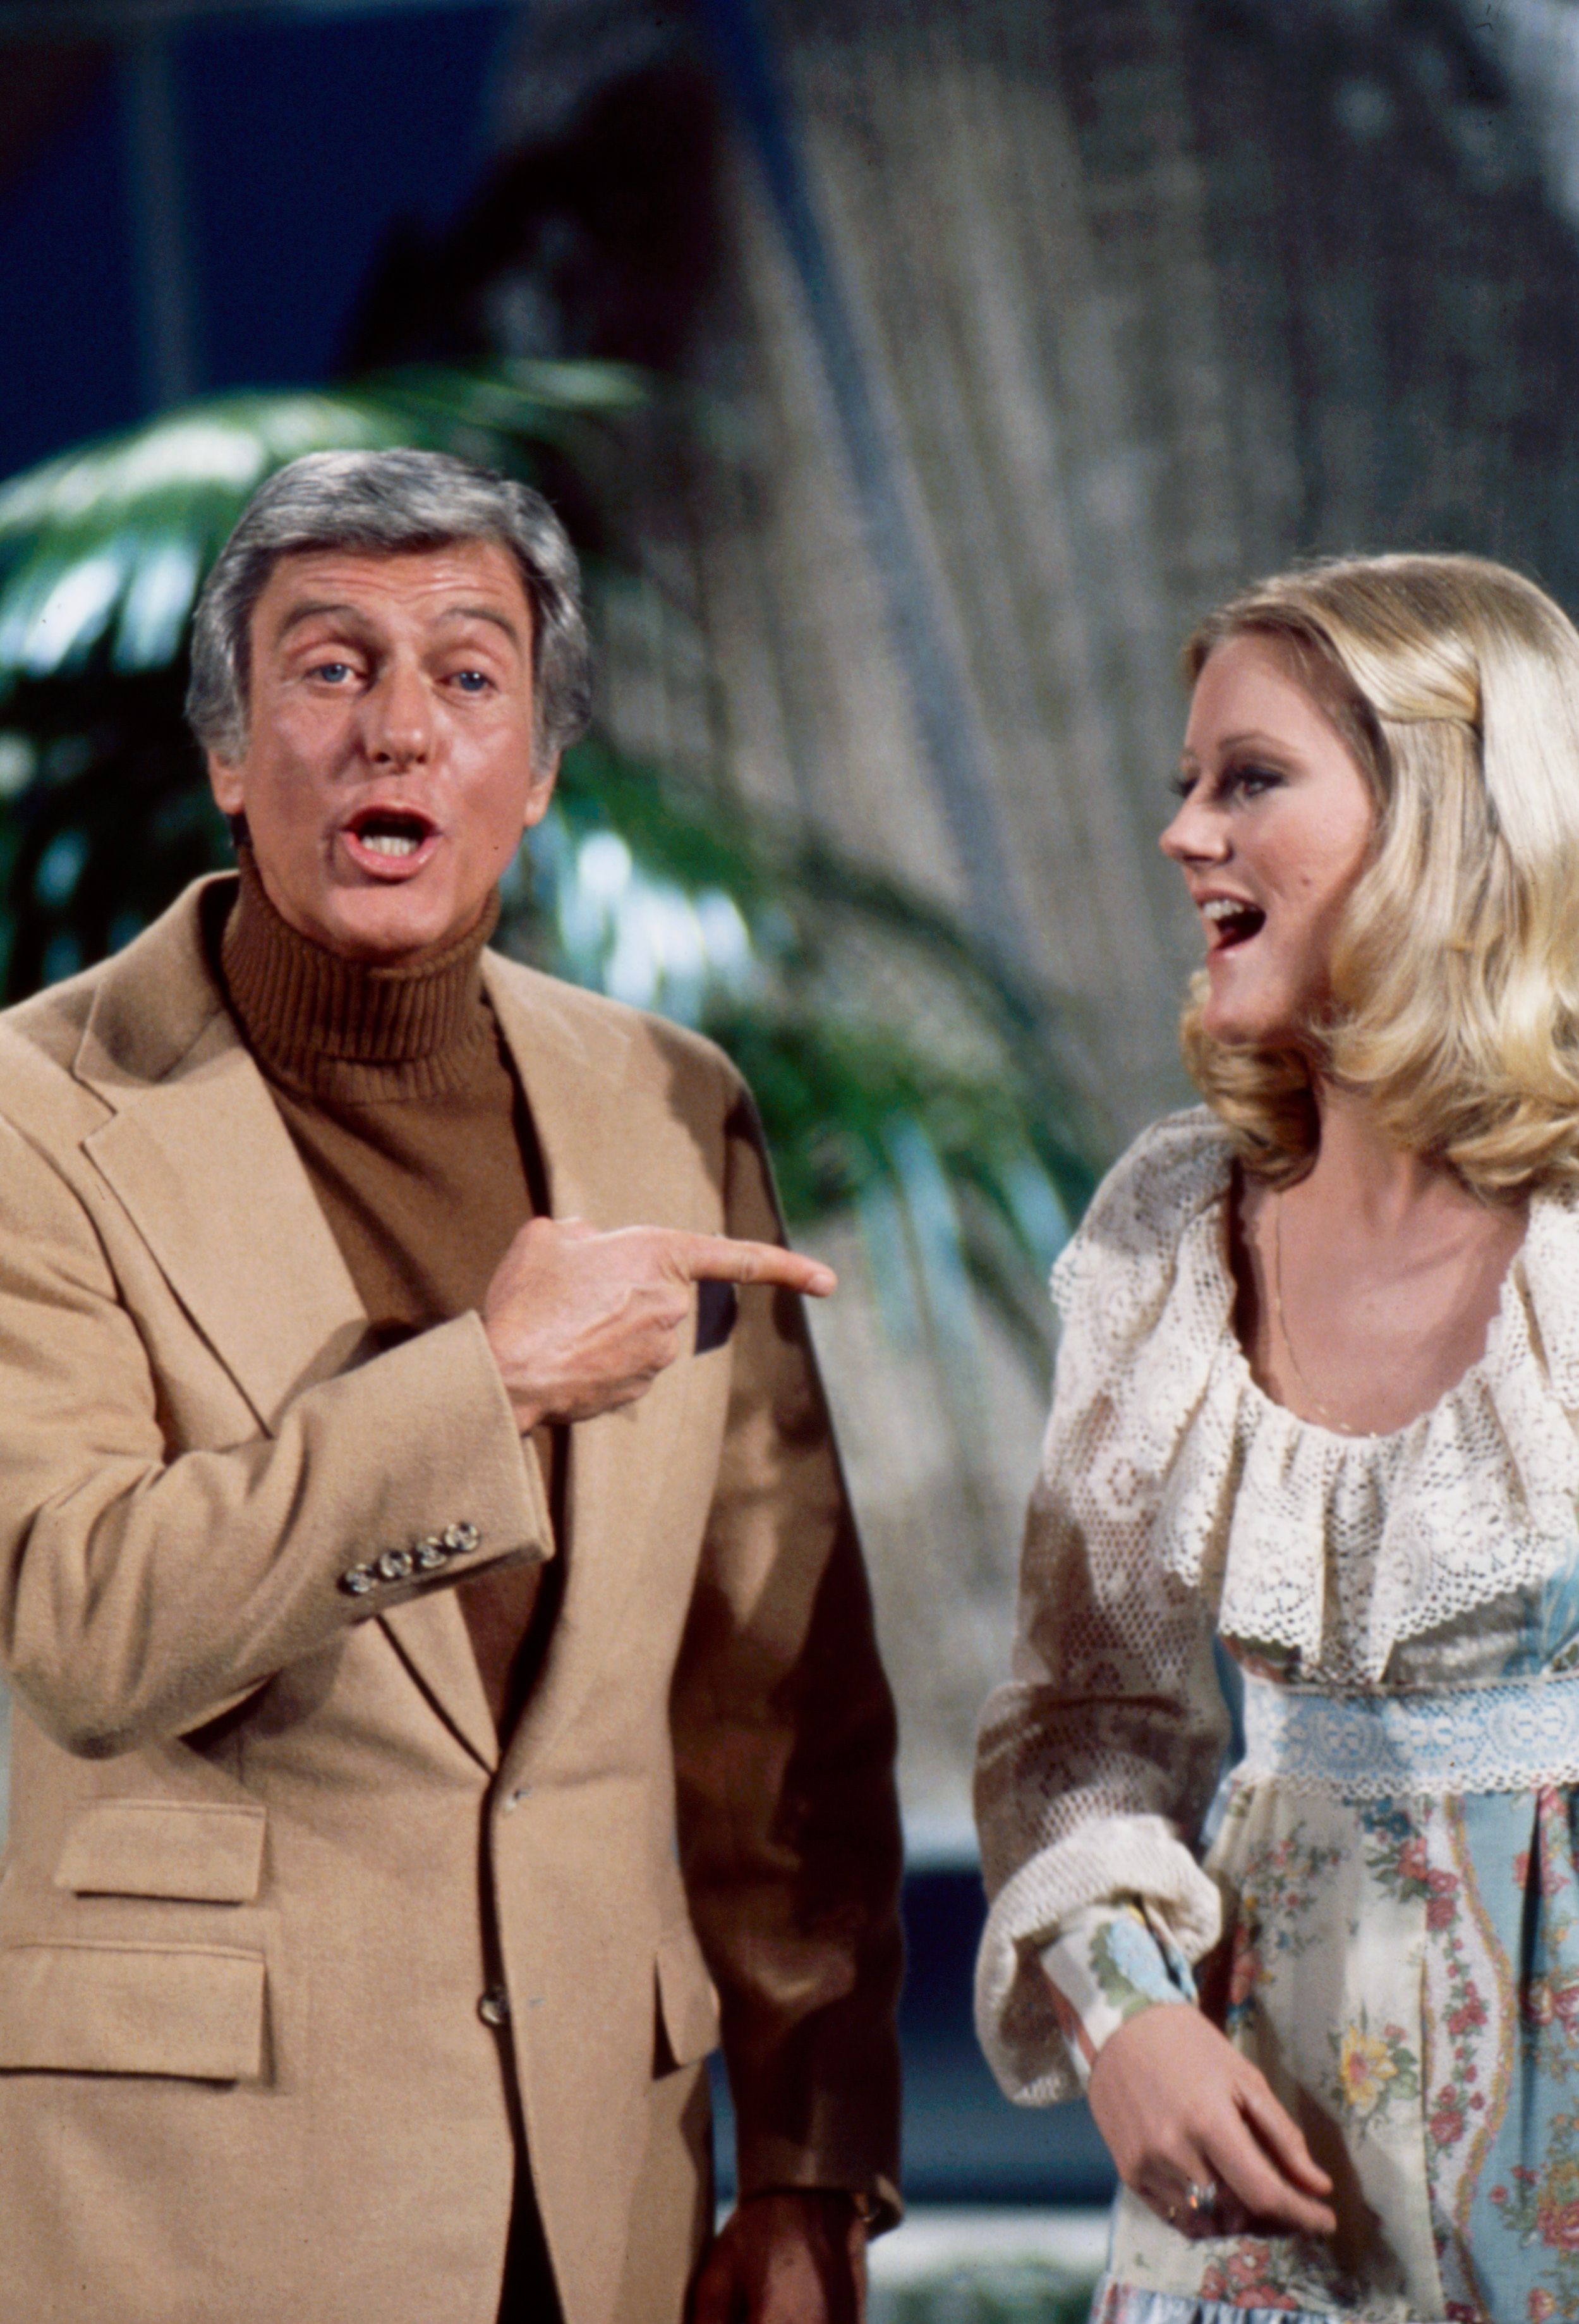 Dick and Stacy Van Dyke appear on the "Dick Van Dyke Show" circa 1975. | Source: Disney General Entertainment Content/Getty Images